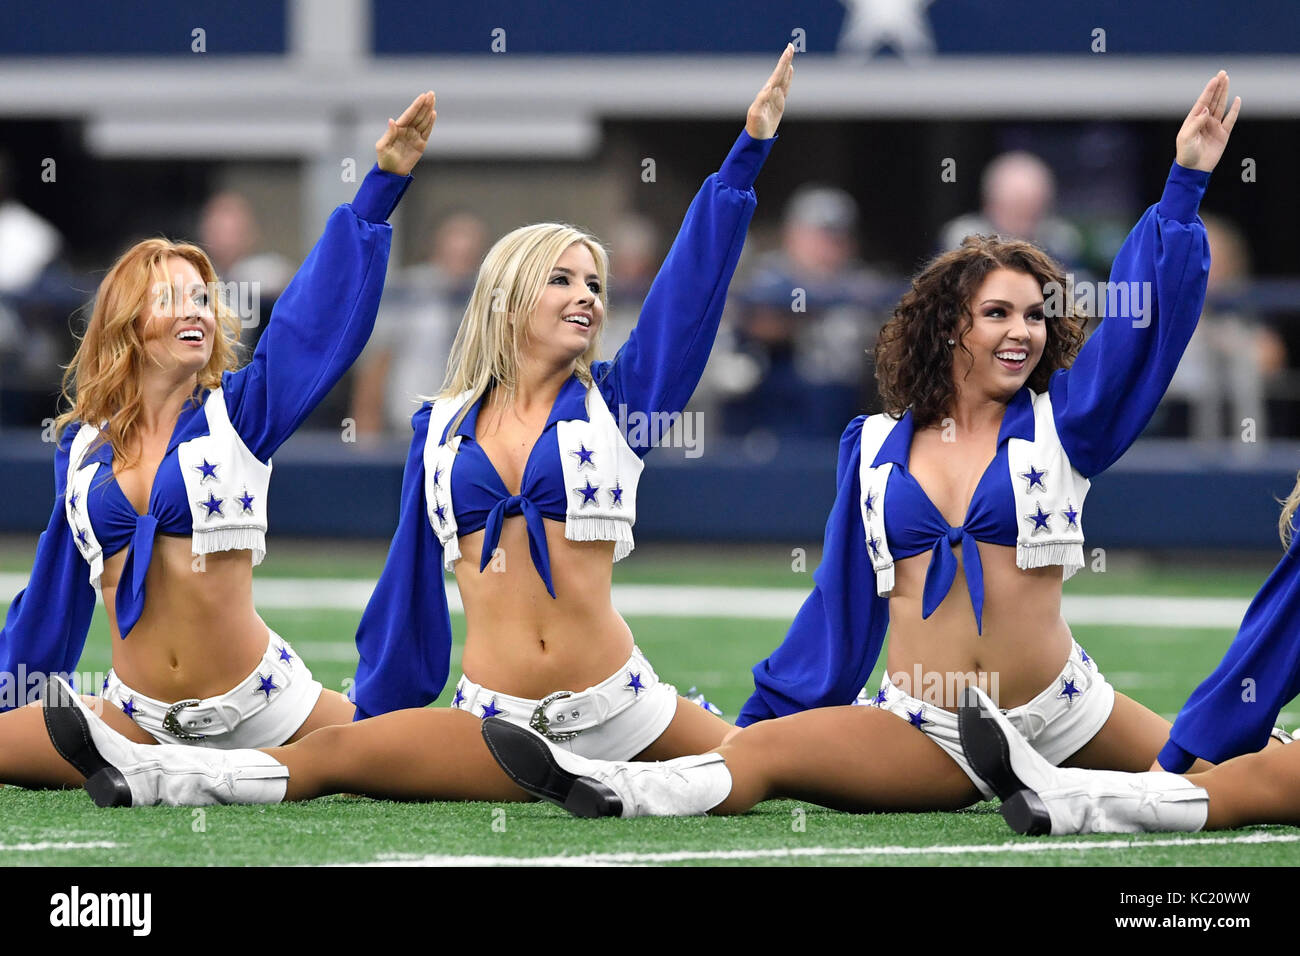 Arlington, Texas, USA. 1st Oct, 2017. The Dallas Cowboys cheerleaders perform prior to an NFL football game between the Los Angeles Rams and the Dallas Cowboys at AT&T Stadium in Arlington, Texas. Shane Roper/CSM/Alamy Live News Stock Photo